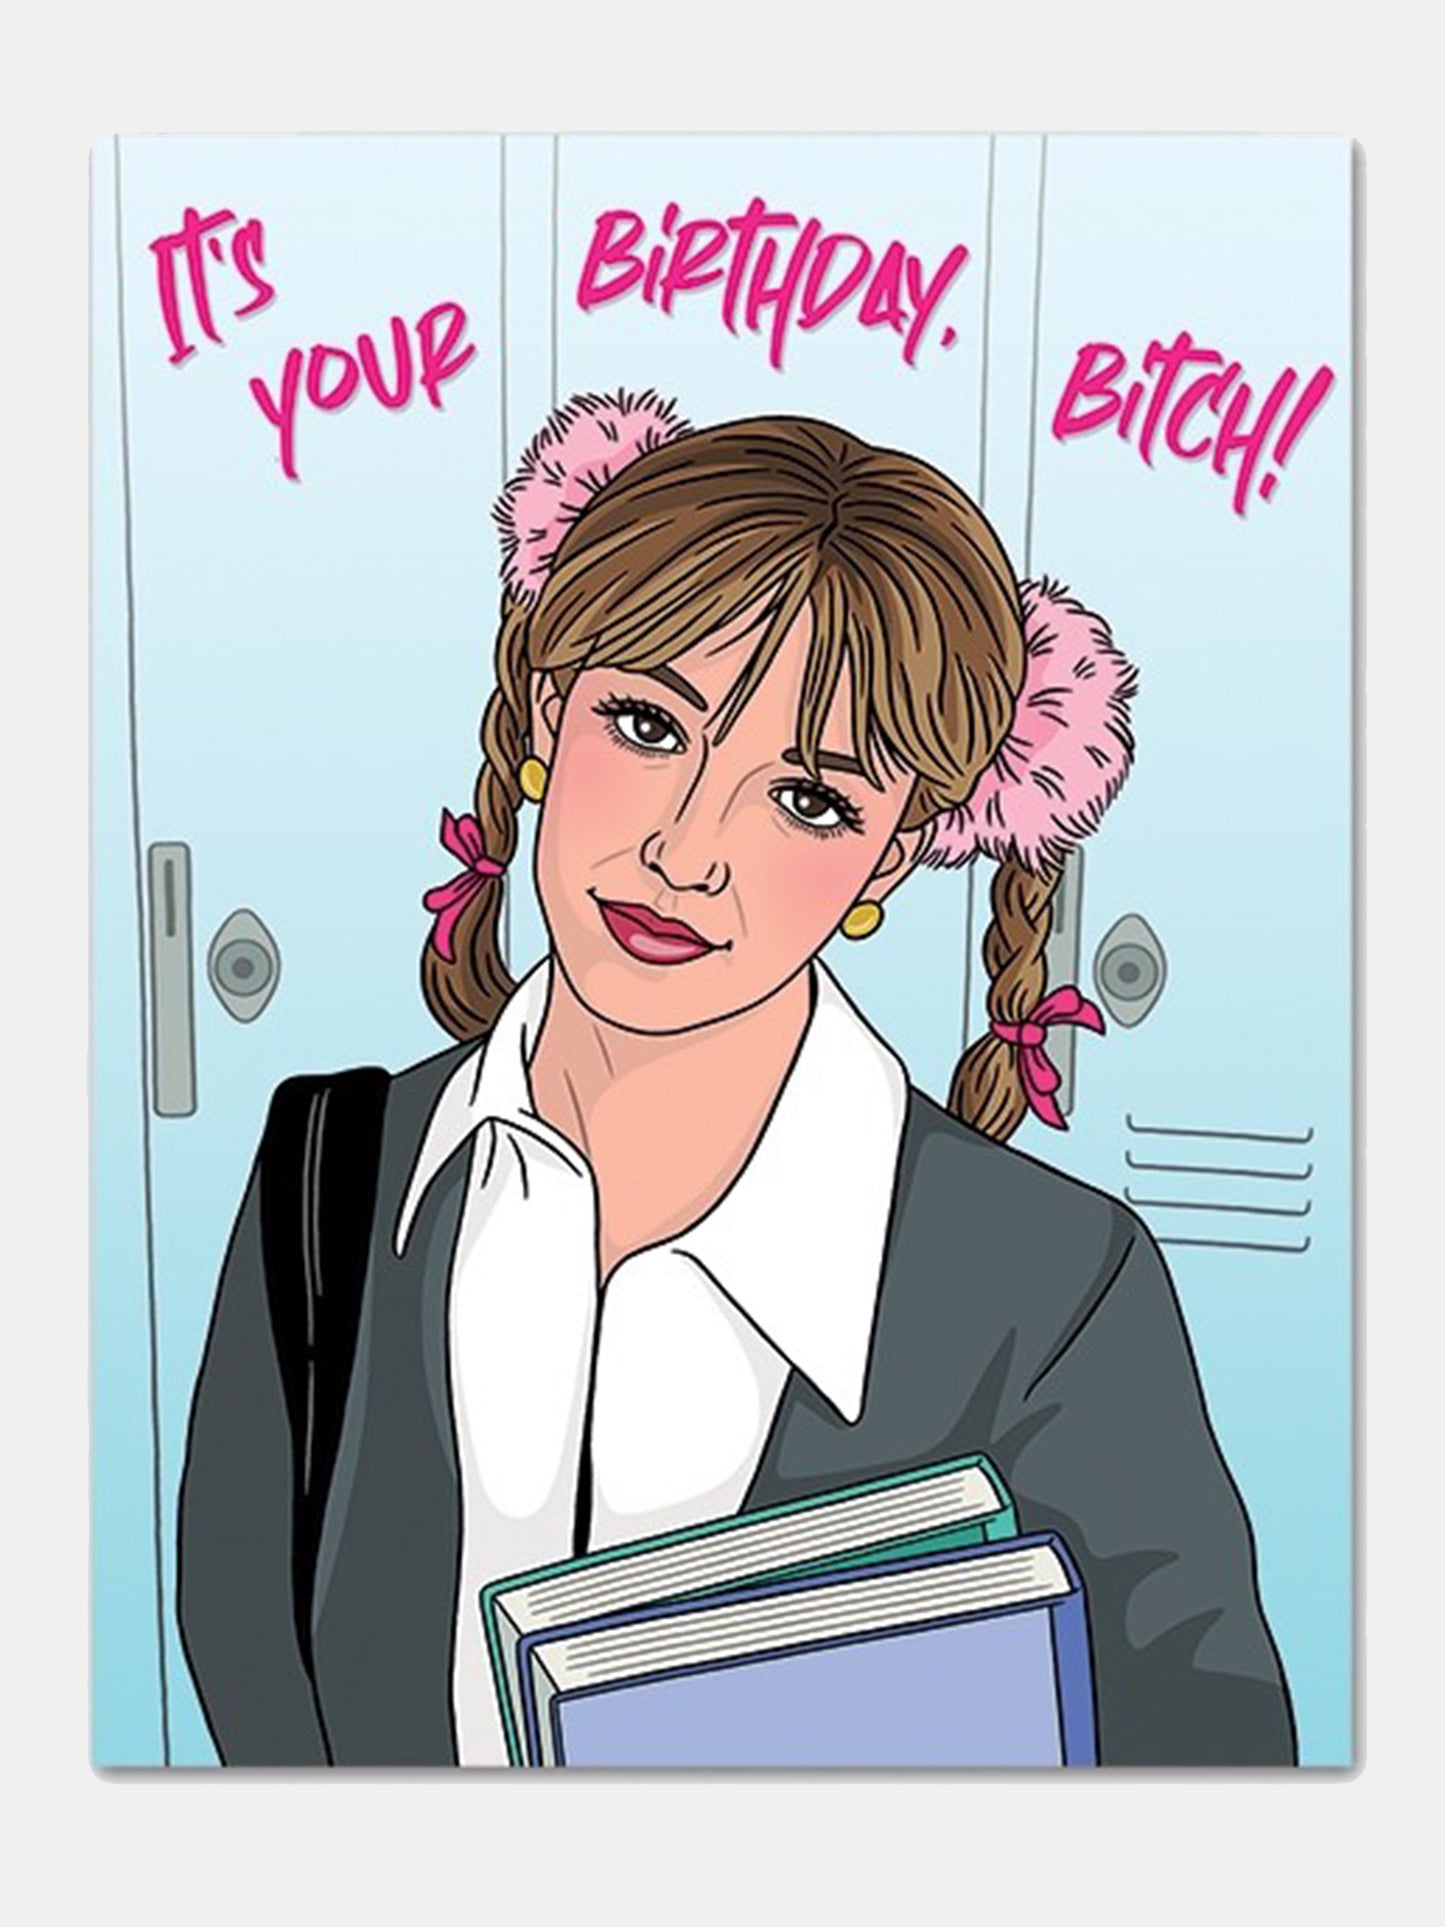 The Found It's Your Birthday, B*tch! Card